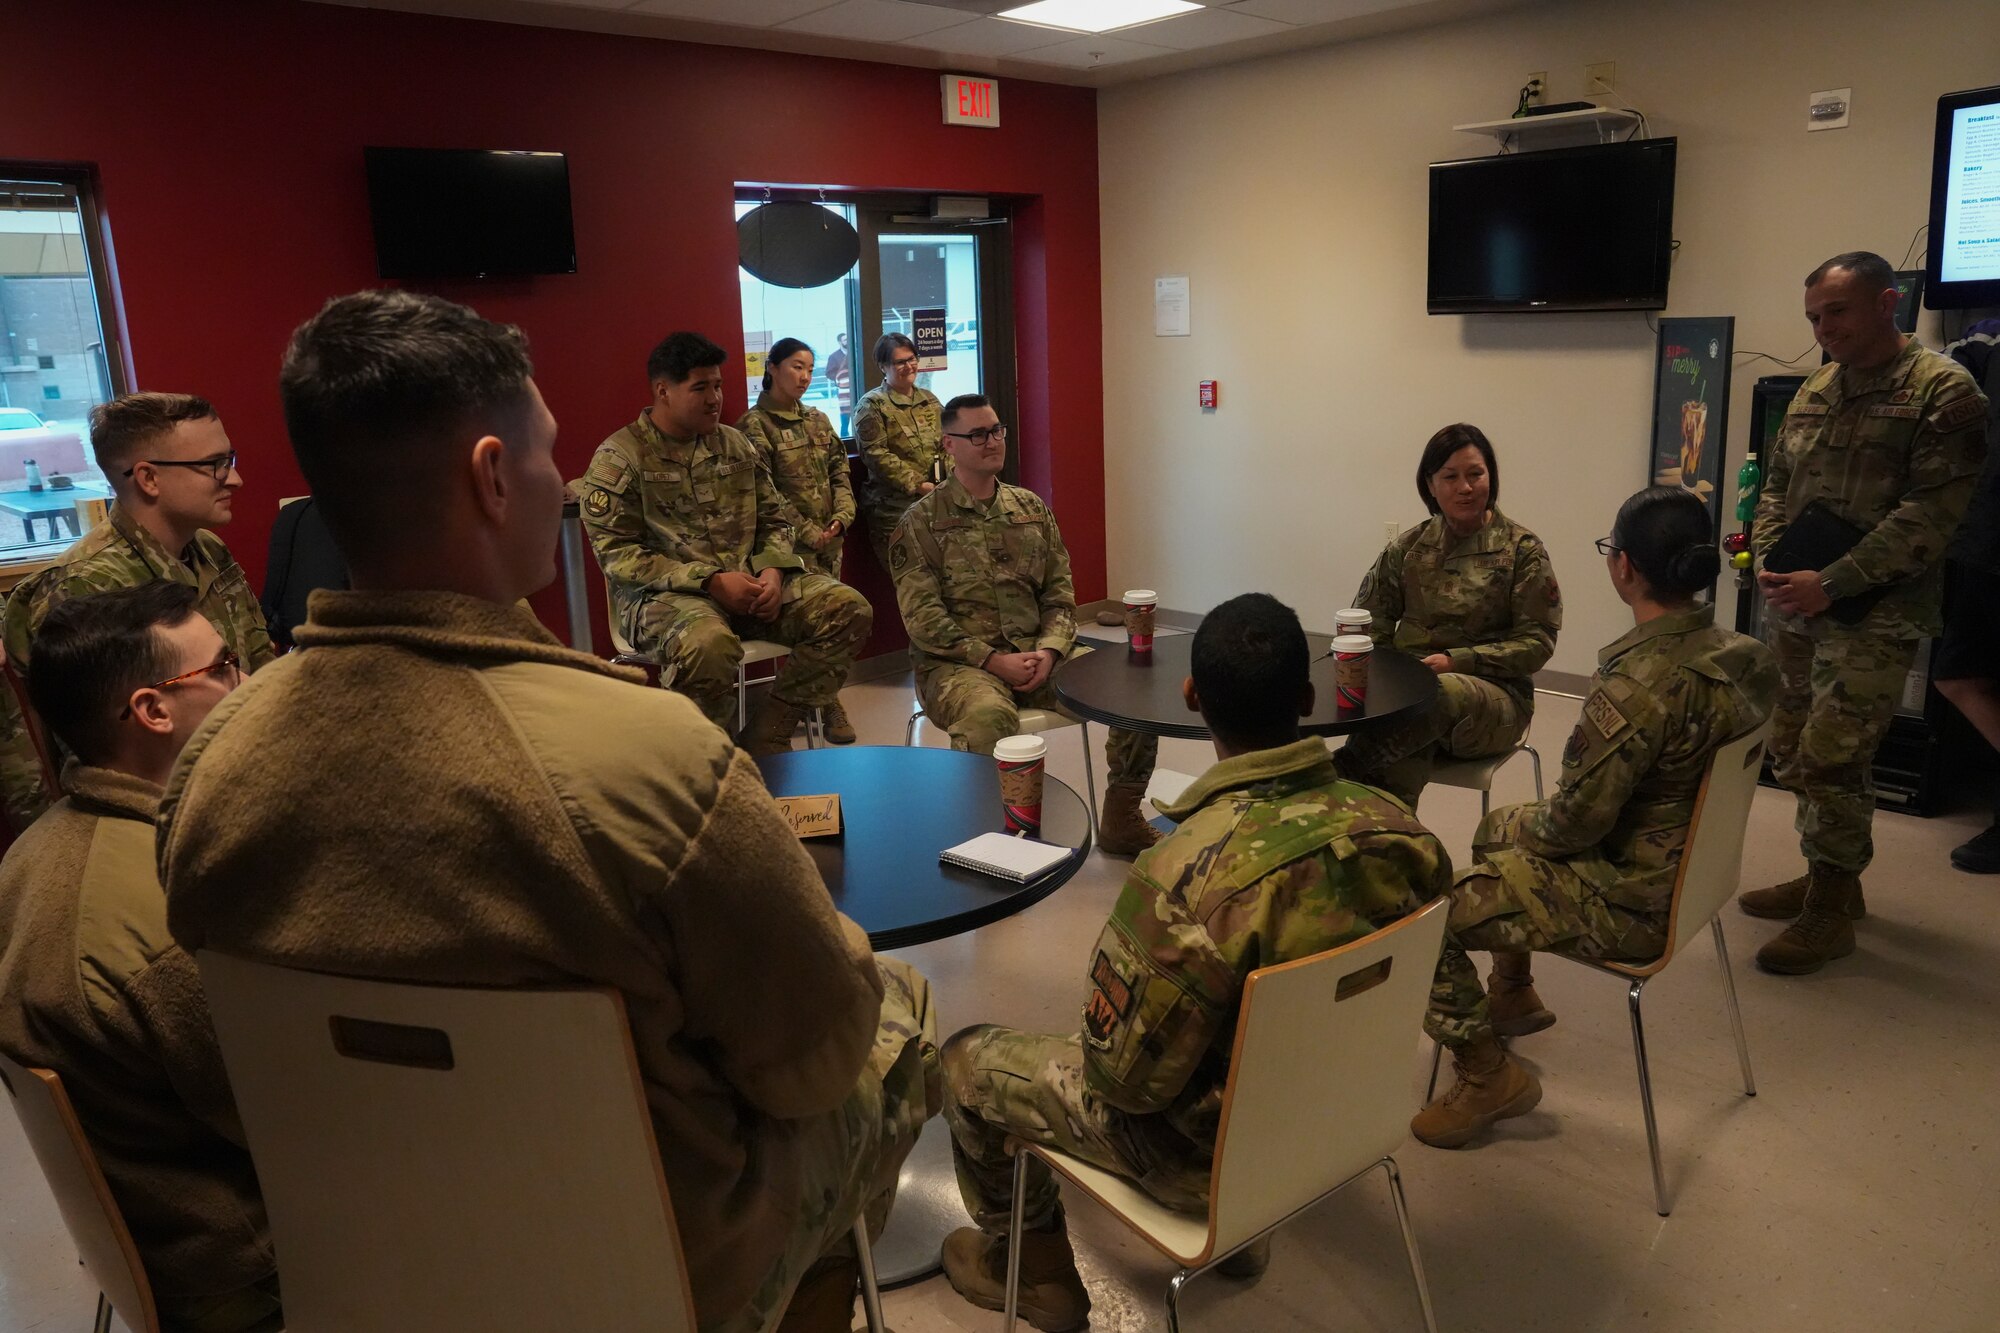 Chief Bass speaks to airmen in a coffee shop.